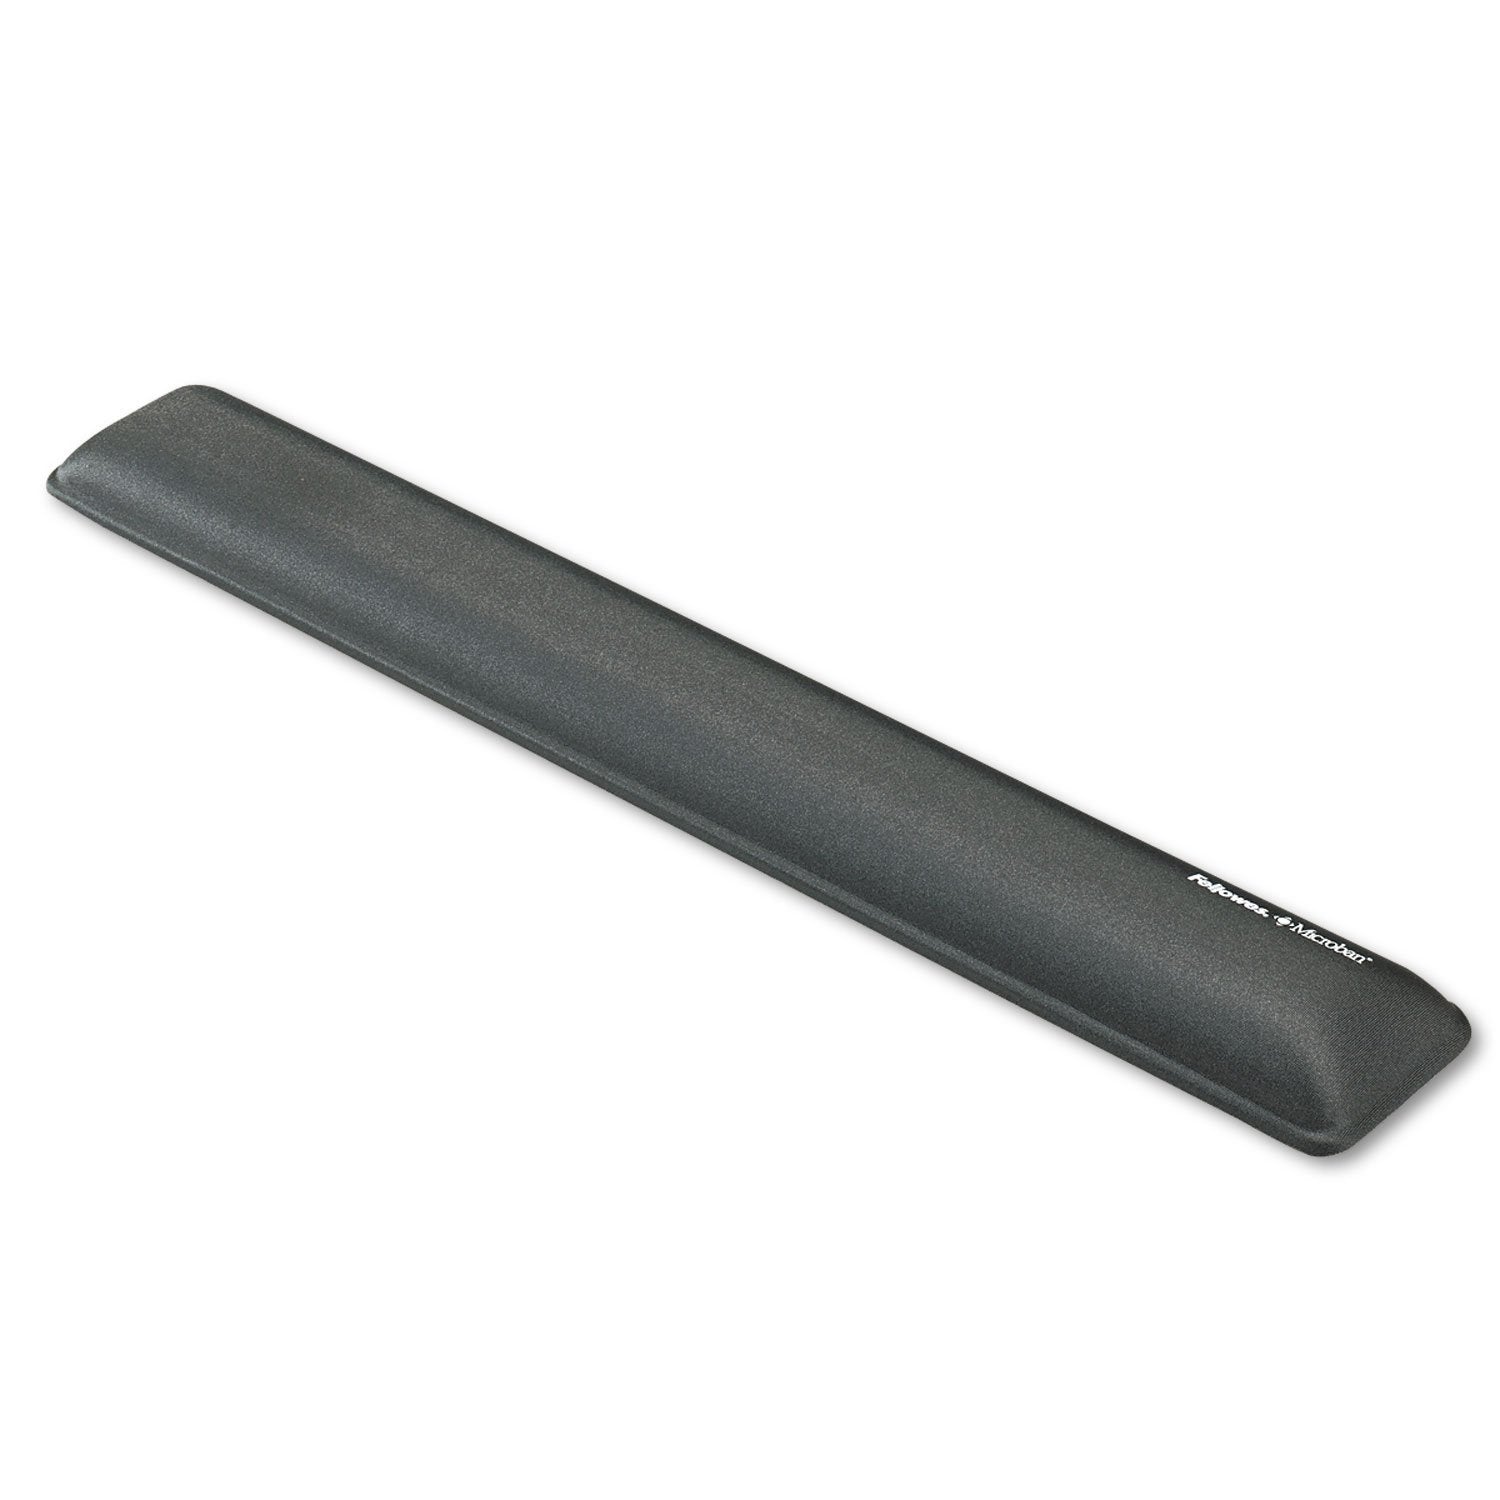 Fellowes Gel Wrist Rest with Microban, Graphite, FW-9175301